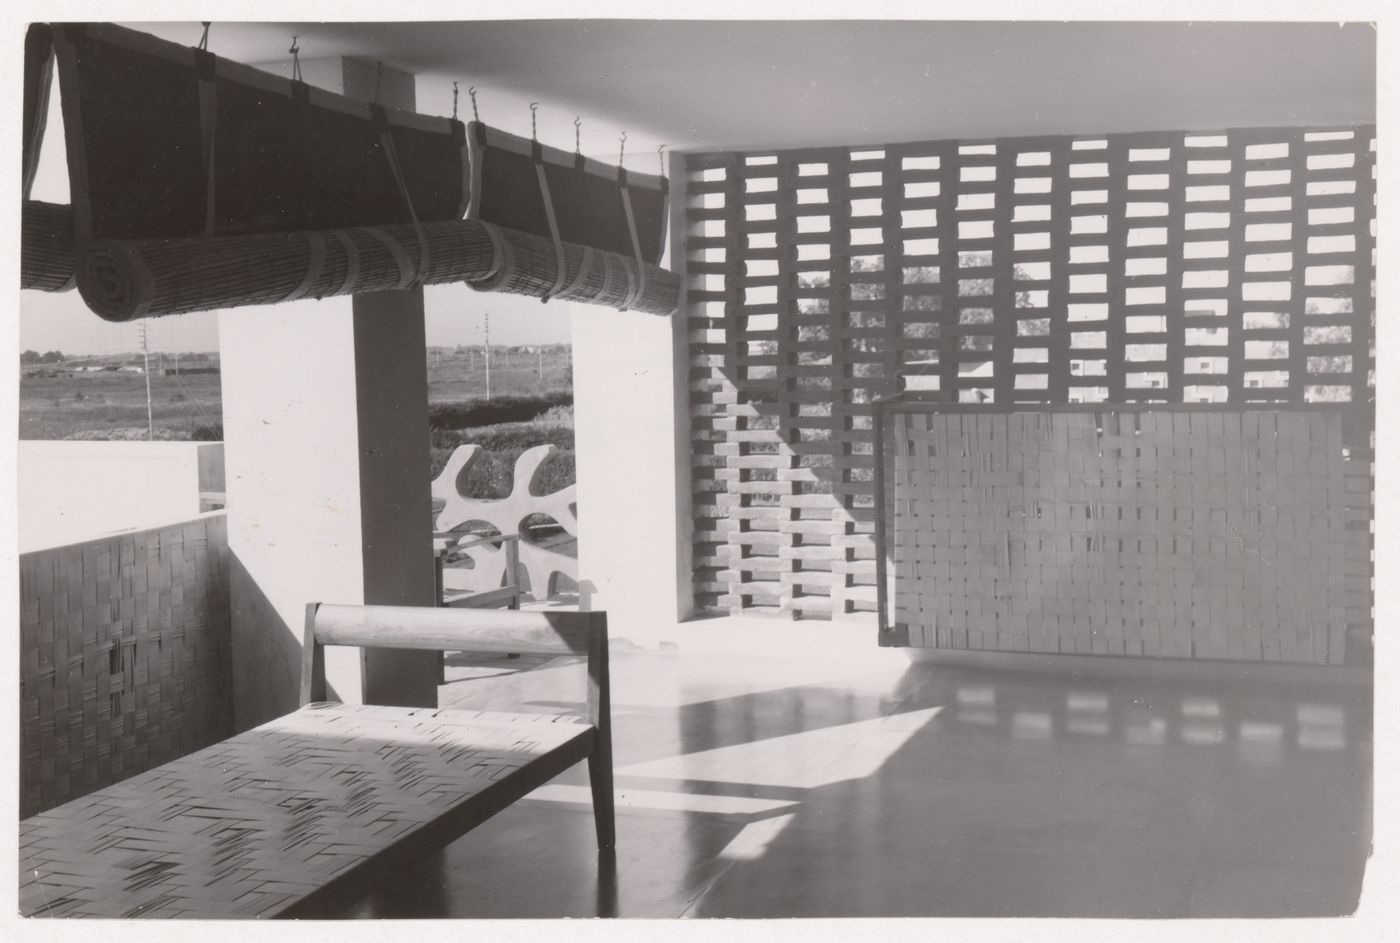 View of a modernized traditional bed and straw blinds in a loggia, Chandigarh, India